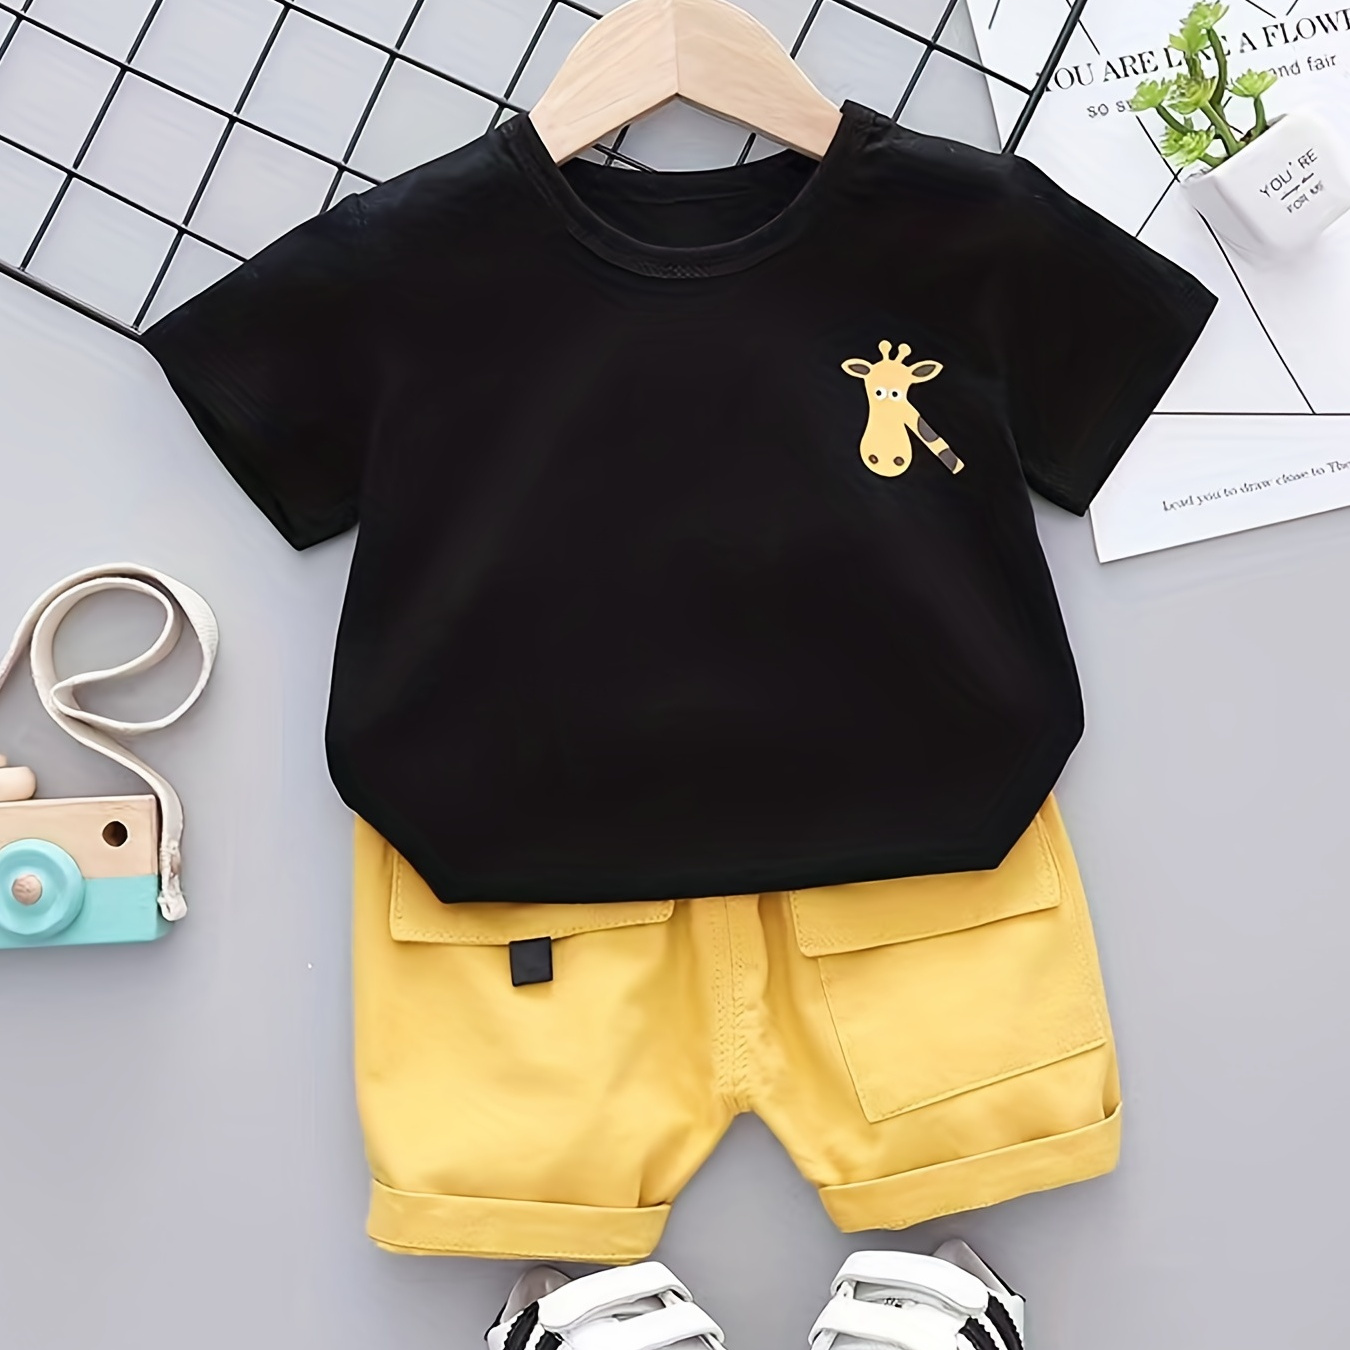 

Boys Cartoon Giraffe Casual Outfit Round Neck T-shirt & Shorts With Pocket For Summer Kids Clothes